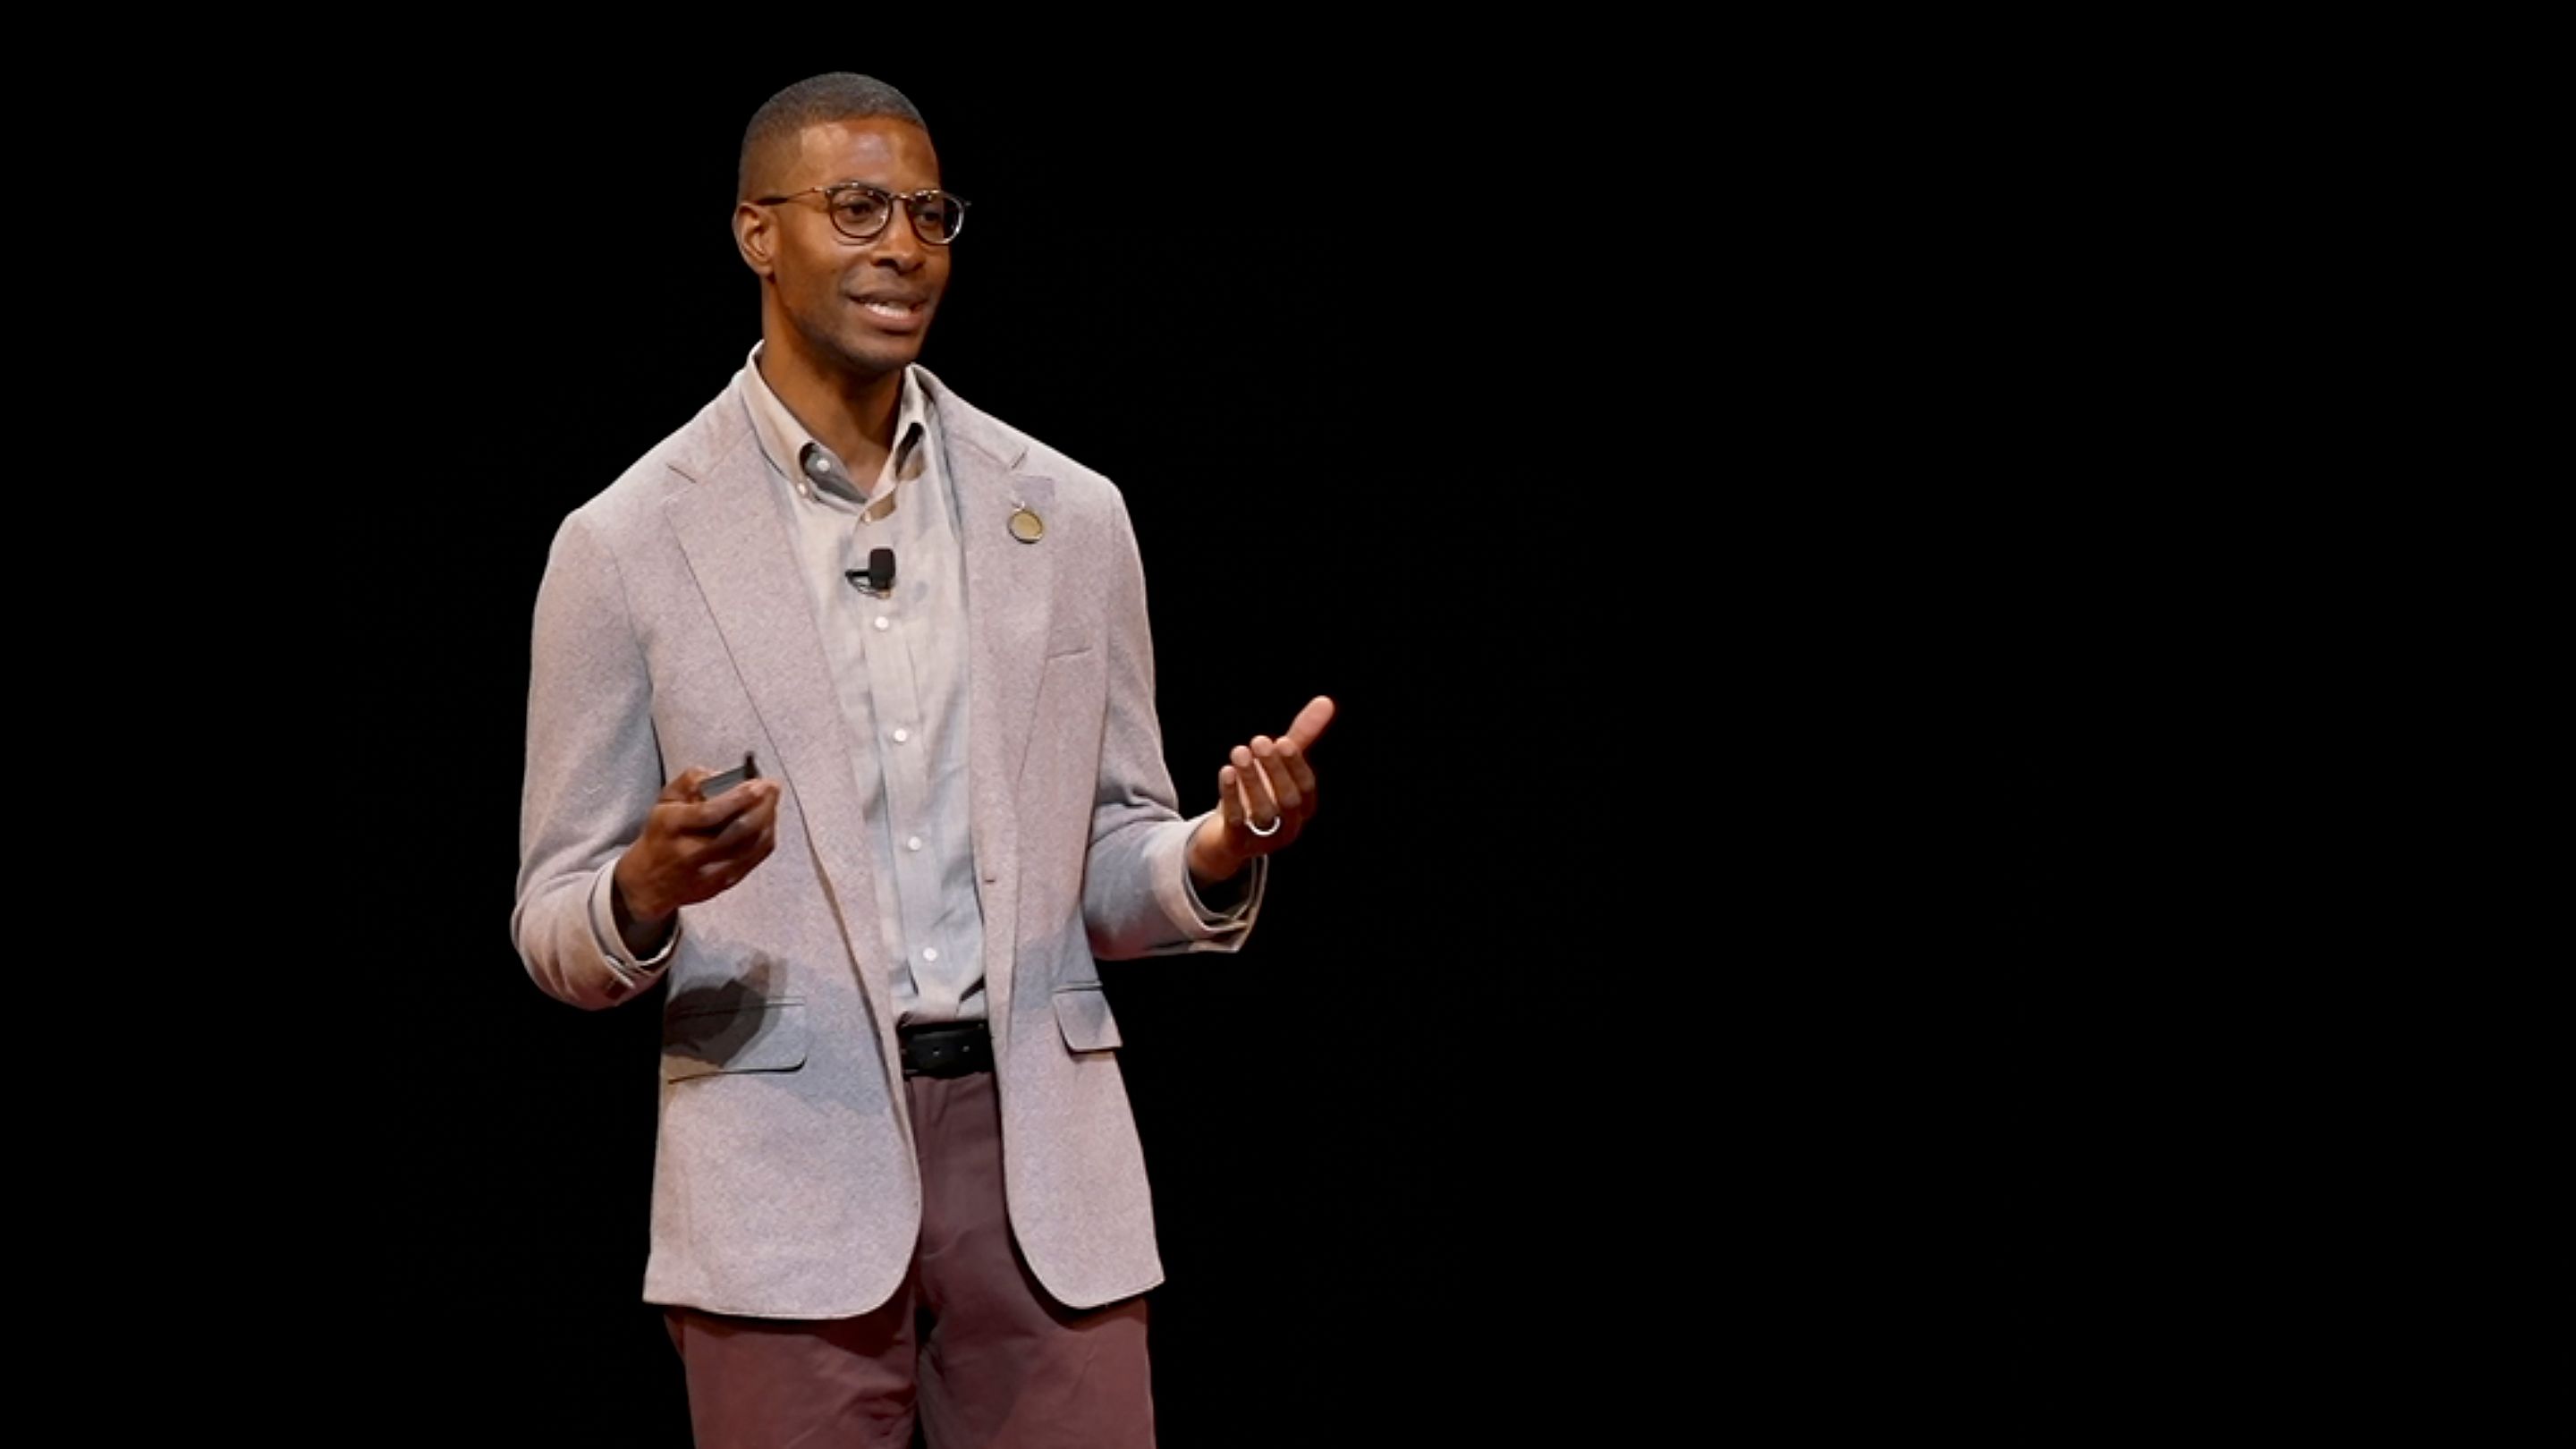 Mesmin Destin: How everyday interactions shape your future